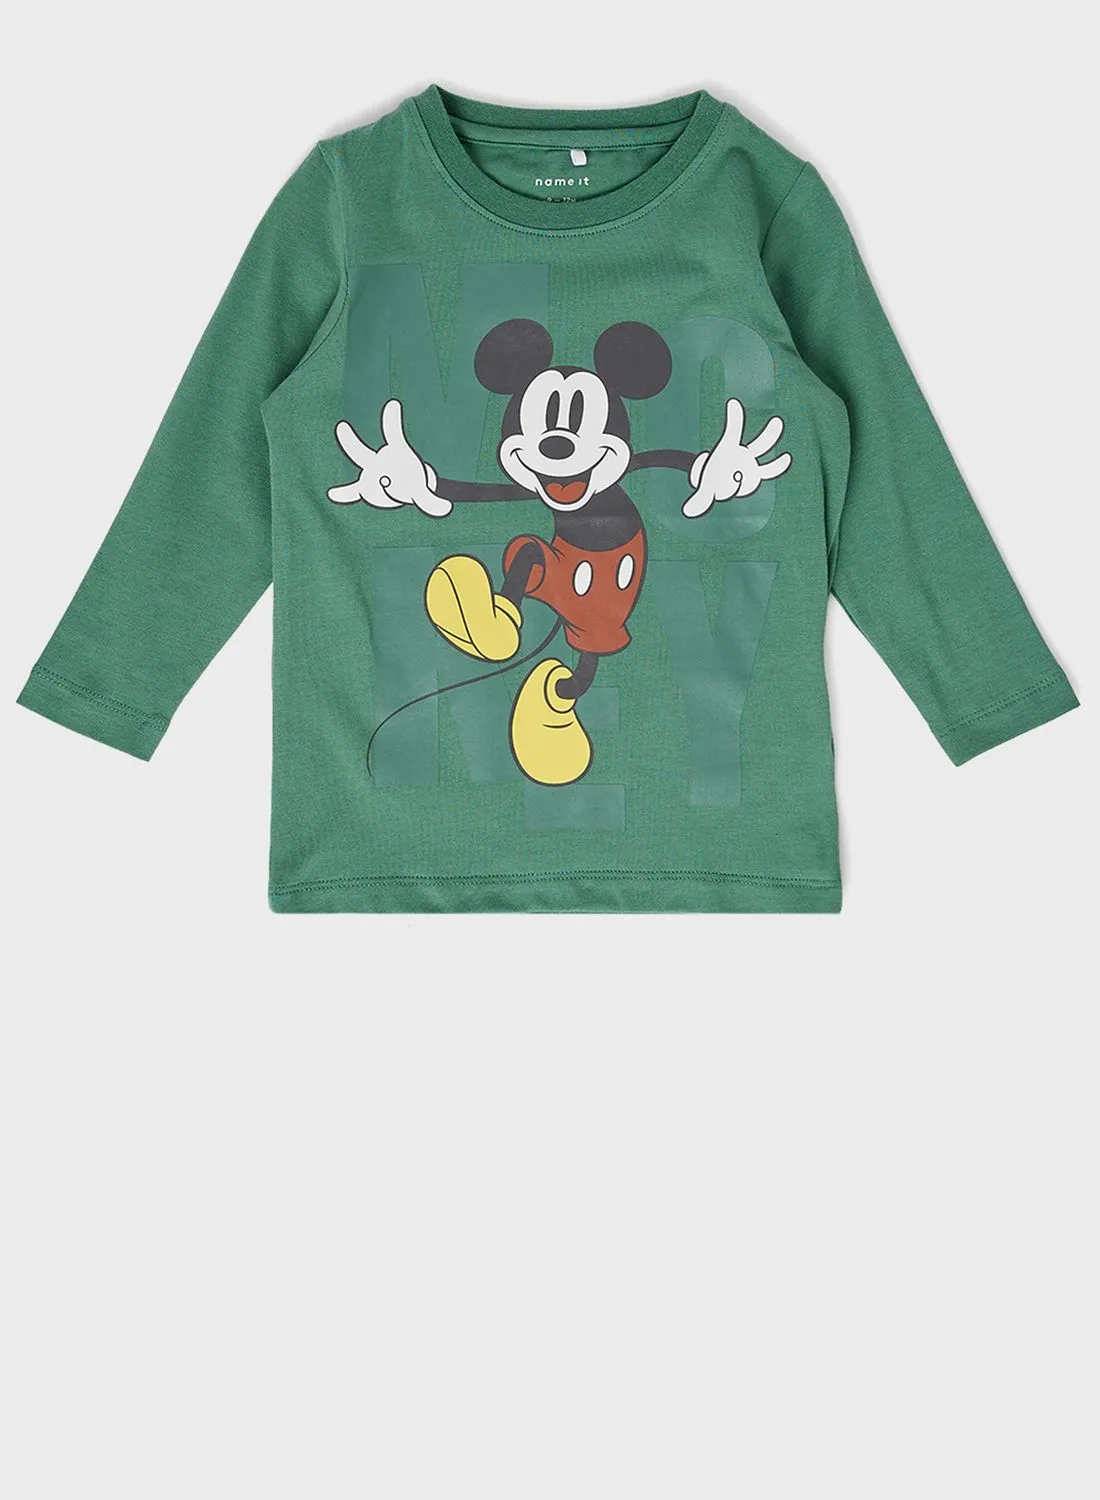 NAME IT Kids Mickey Mouse T-Shirt